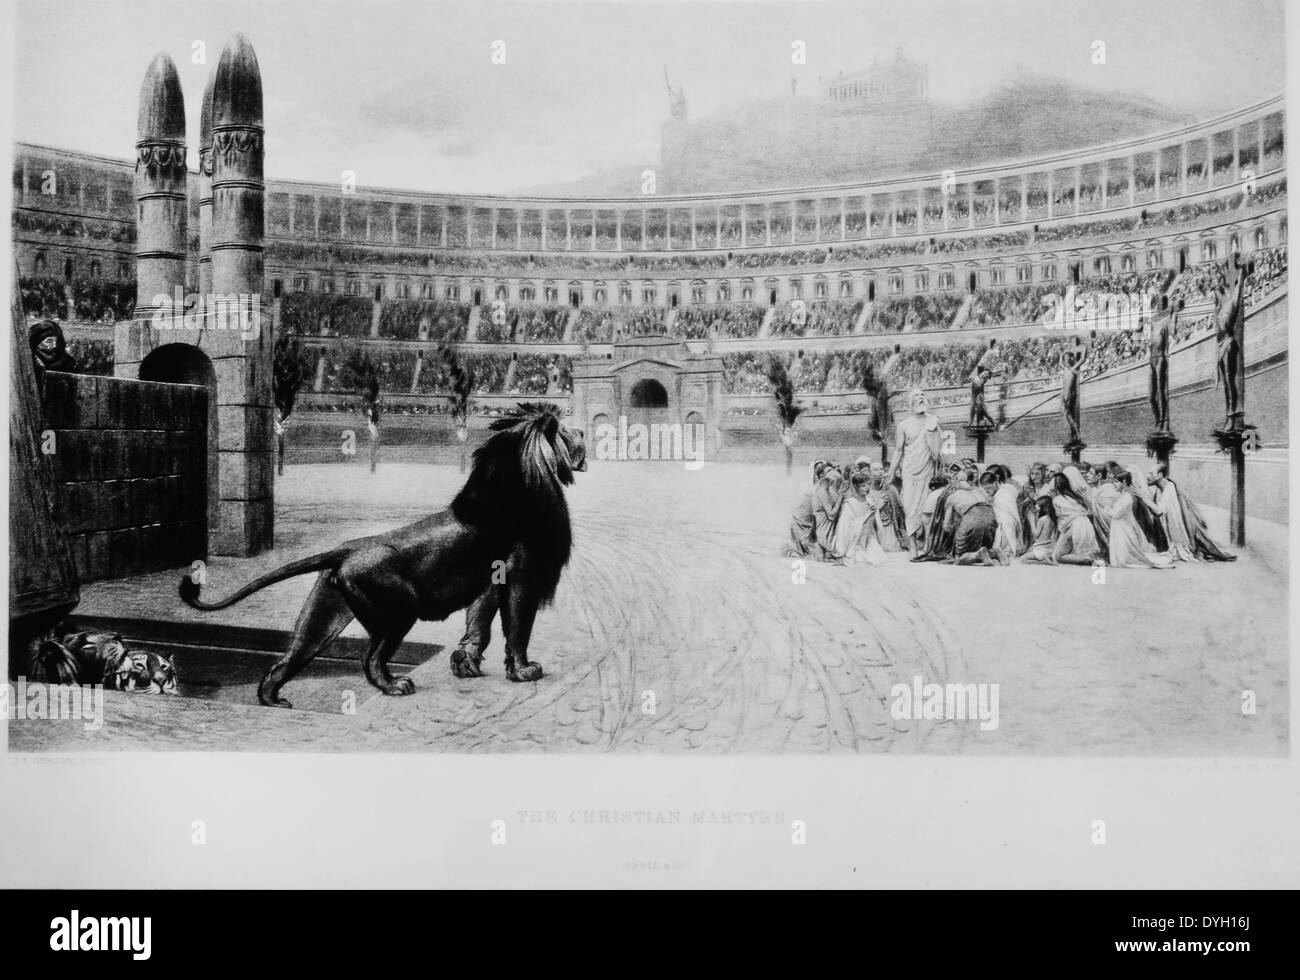 Lion and Christian Martyrs, Colosseum, Rome, Italy, 19th Century Engraving Stock Photo